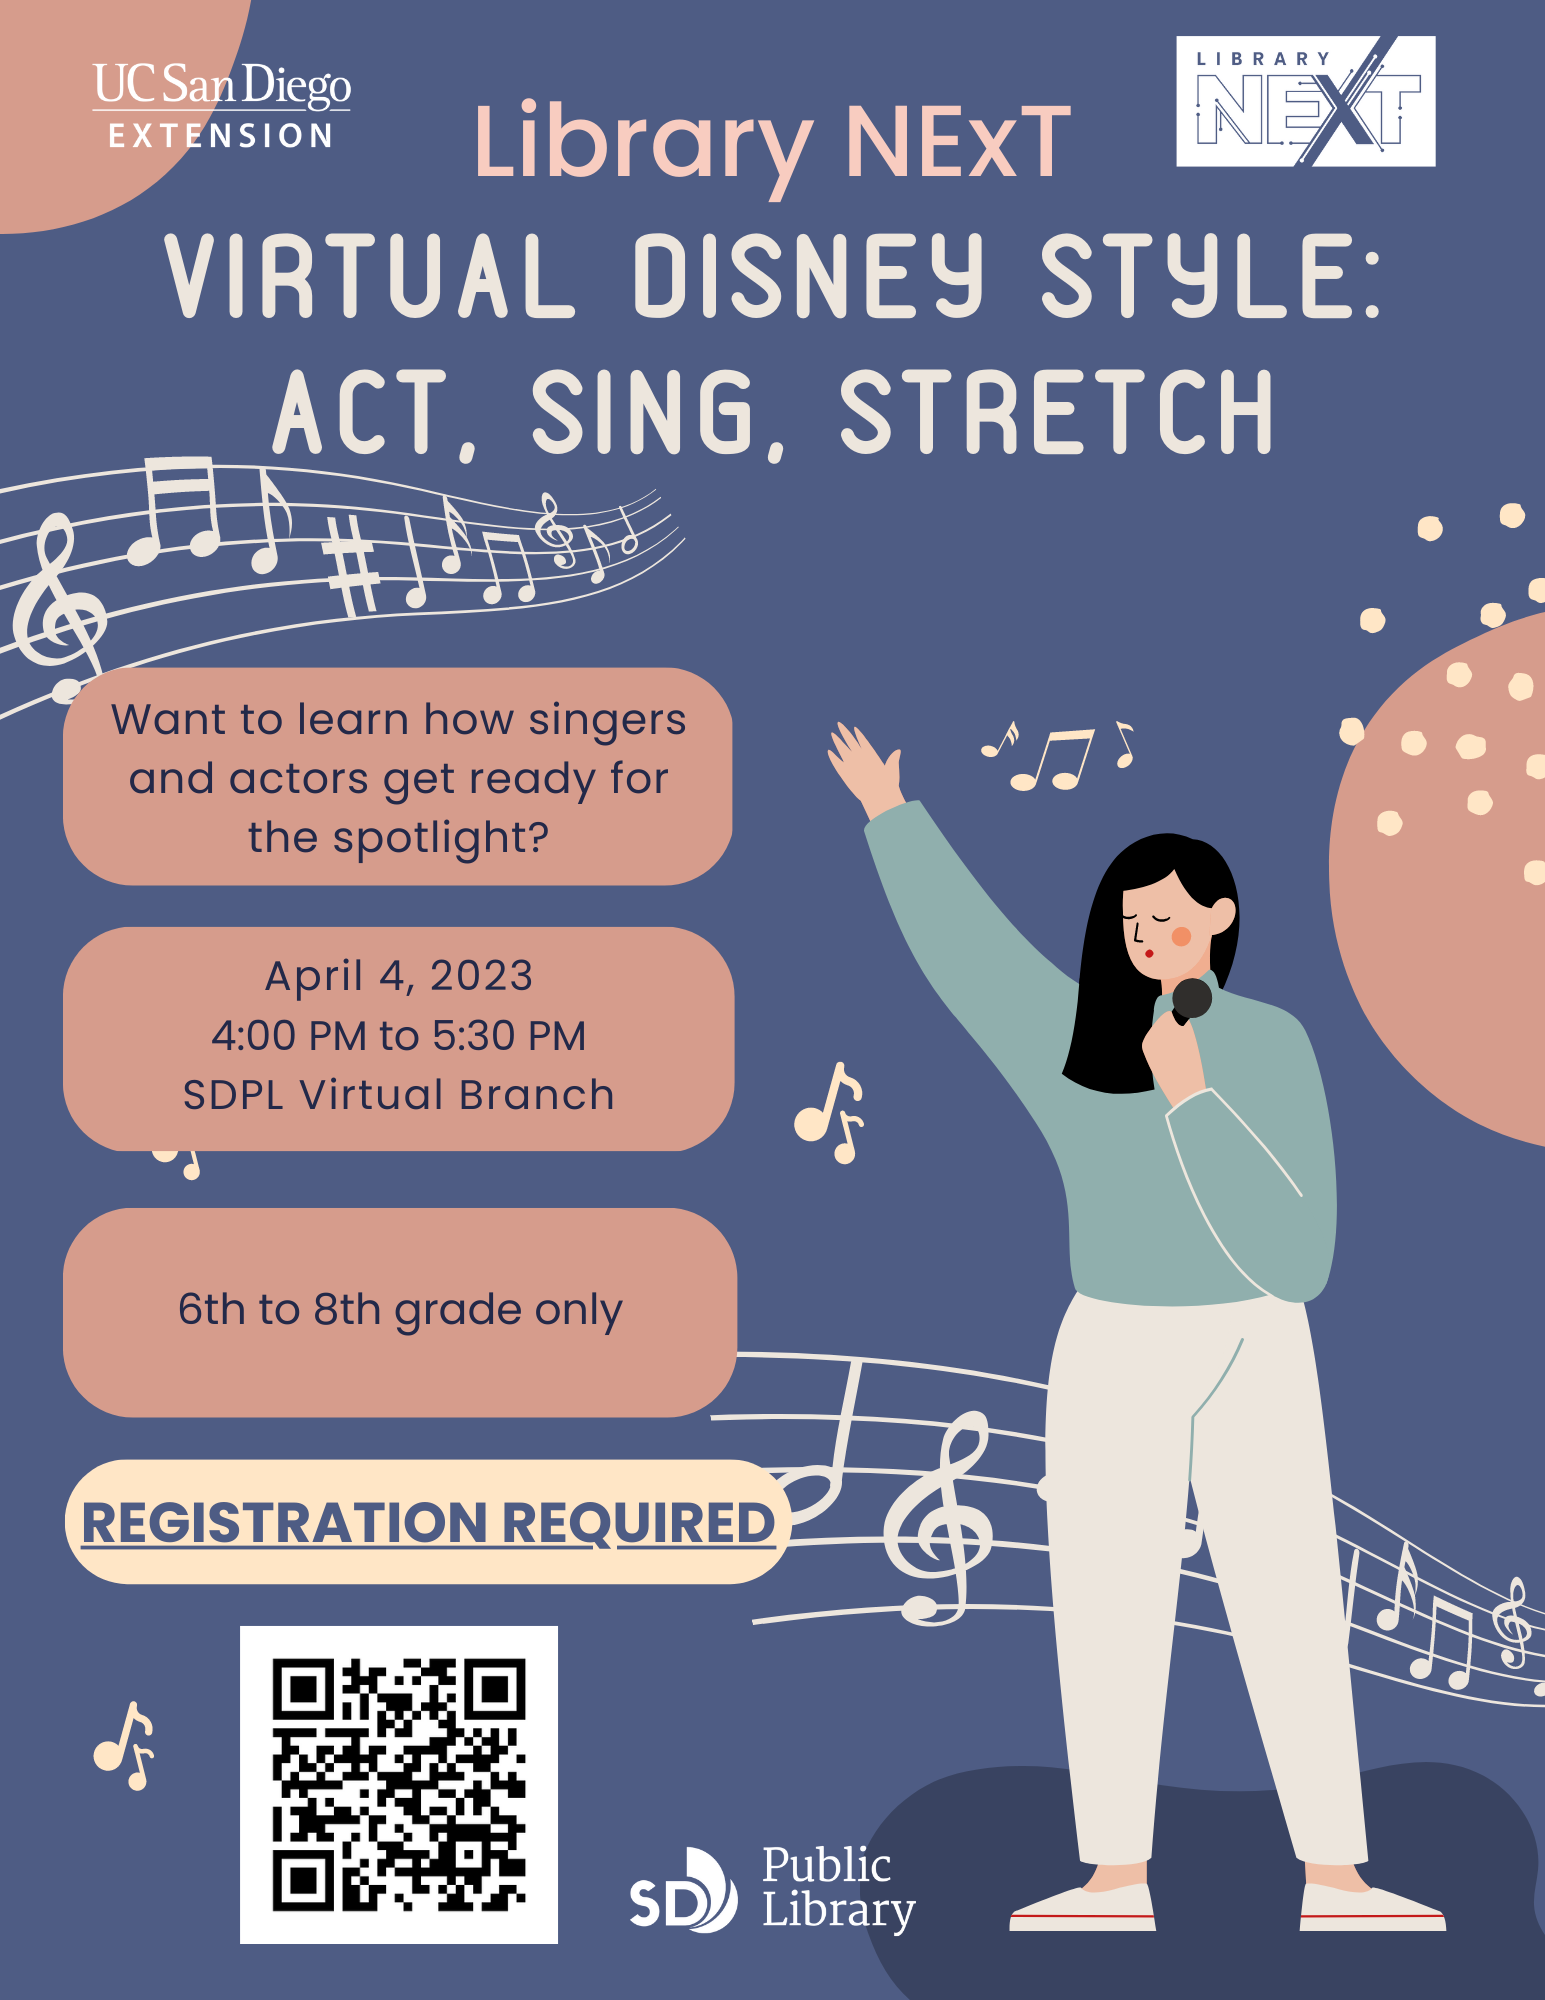 Library NExT. Virtual Disney style: act, sing, stretch. Want to learn how singers and actors get ready for the spotlight? April 4, 2023. 4 PM to 5:30 PM. SDPL virtual branch. 6th to 8th grade only. Registration required.